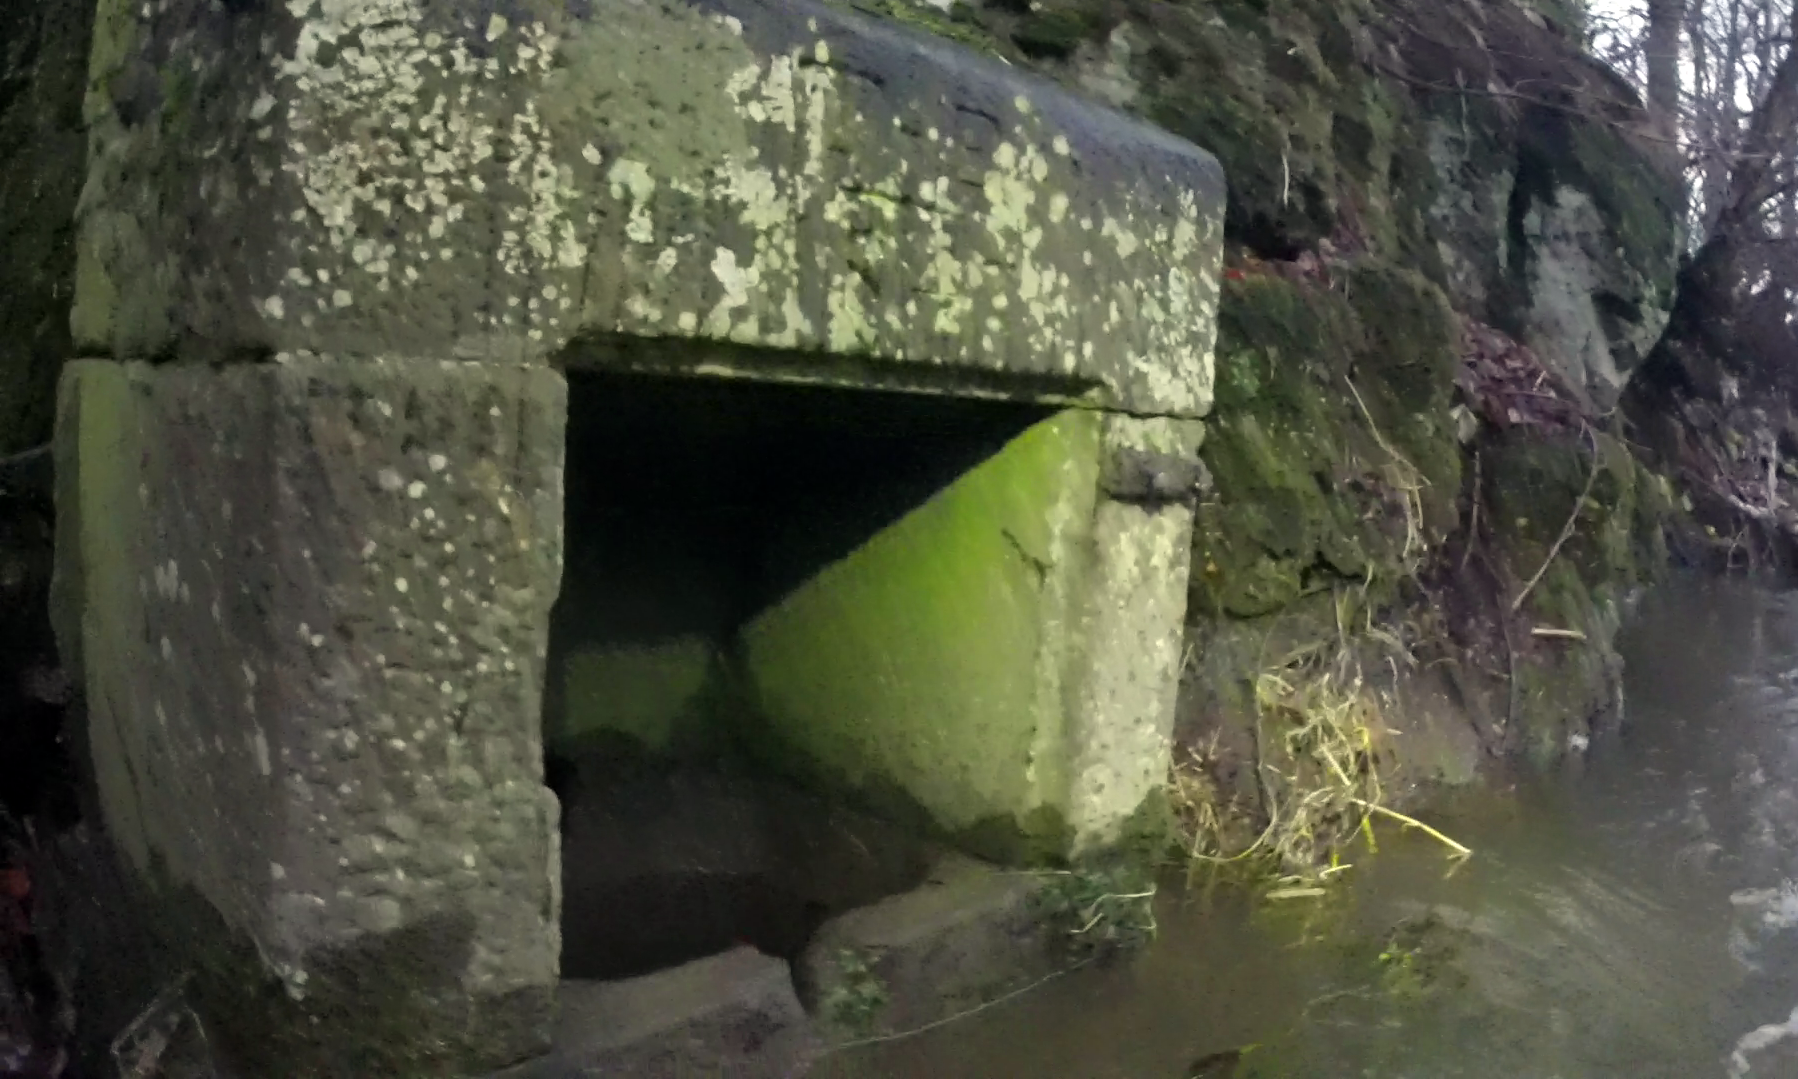 The Holy Well of Balmossie.